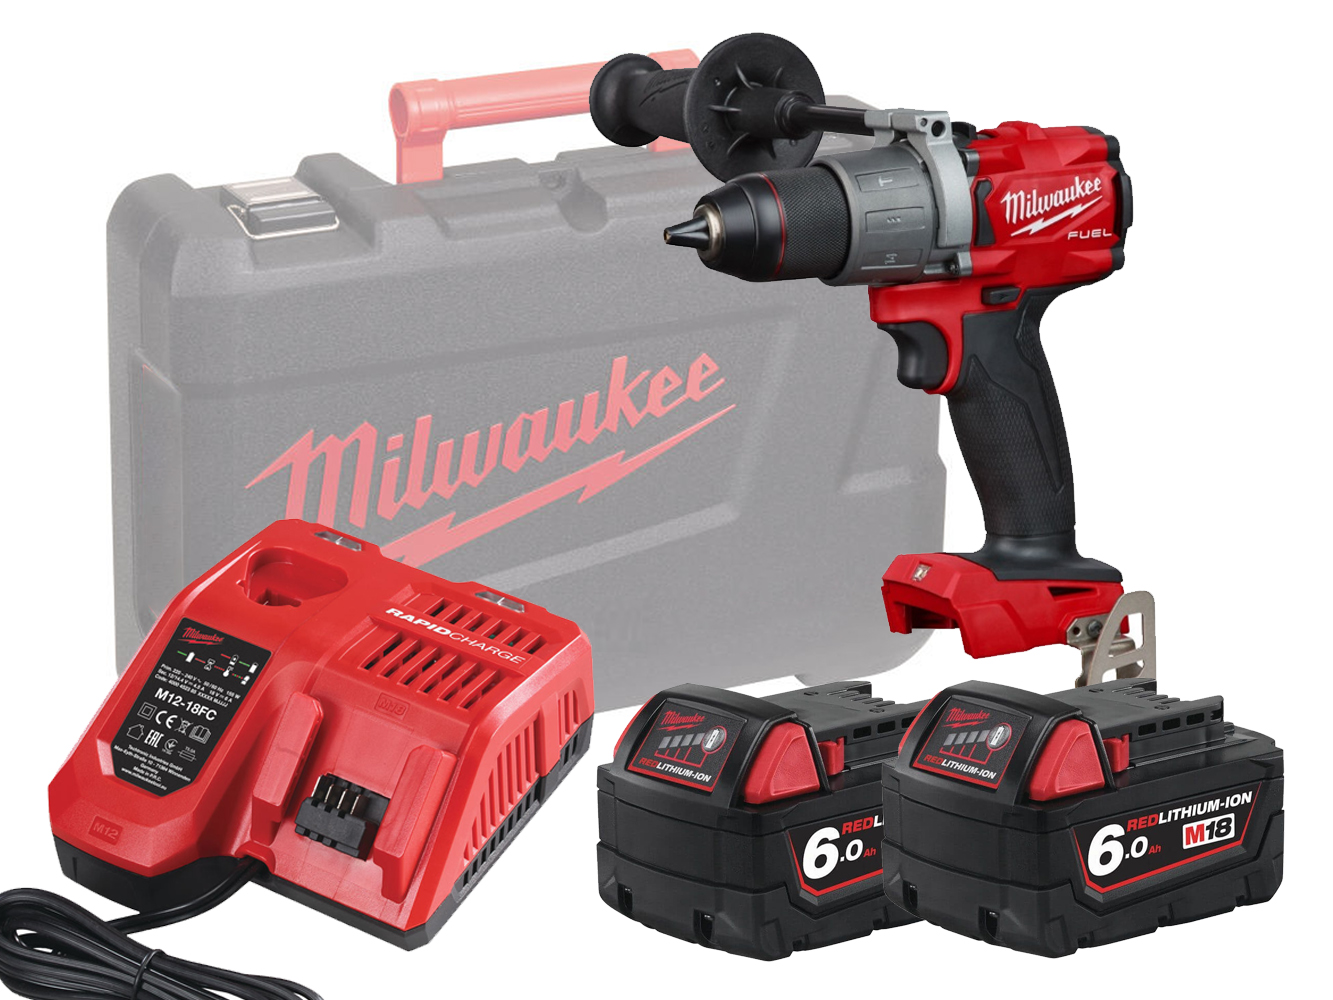 Milwaukee M18FPD2 18V Fuel Brushless Percussion Drill - 6.0Ah Pack